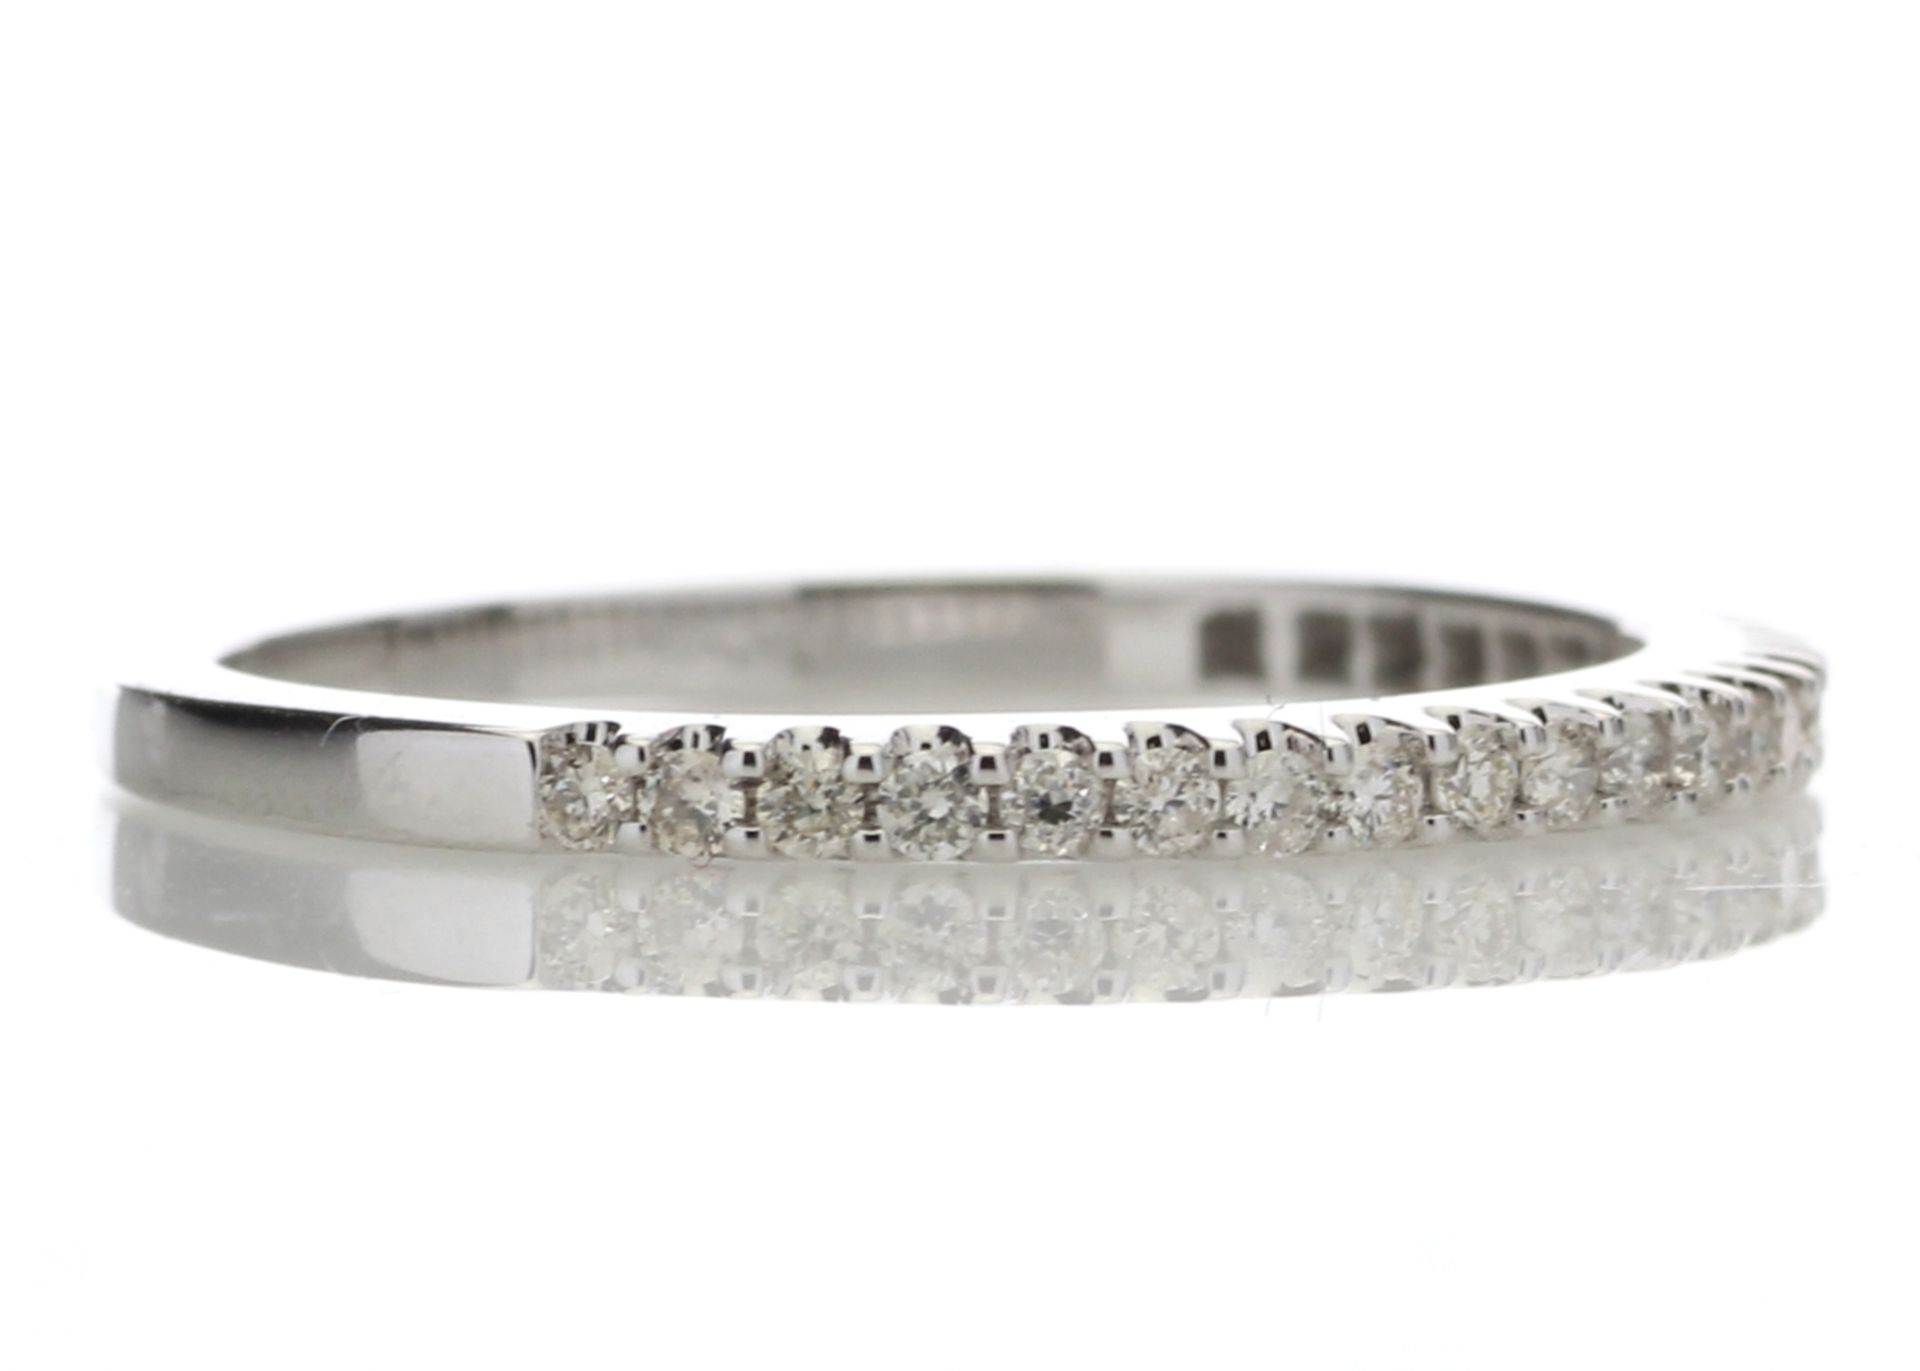 9ct White Gold Diamond Half Eternity Ring 0.25 Carats - Valued by GIE £2,745.00 - 9ct White Gold - Image 4 of 5